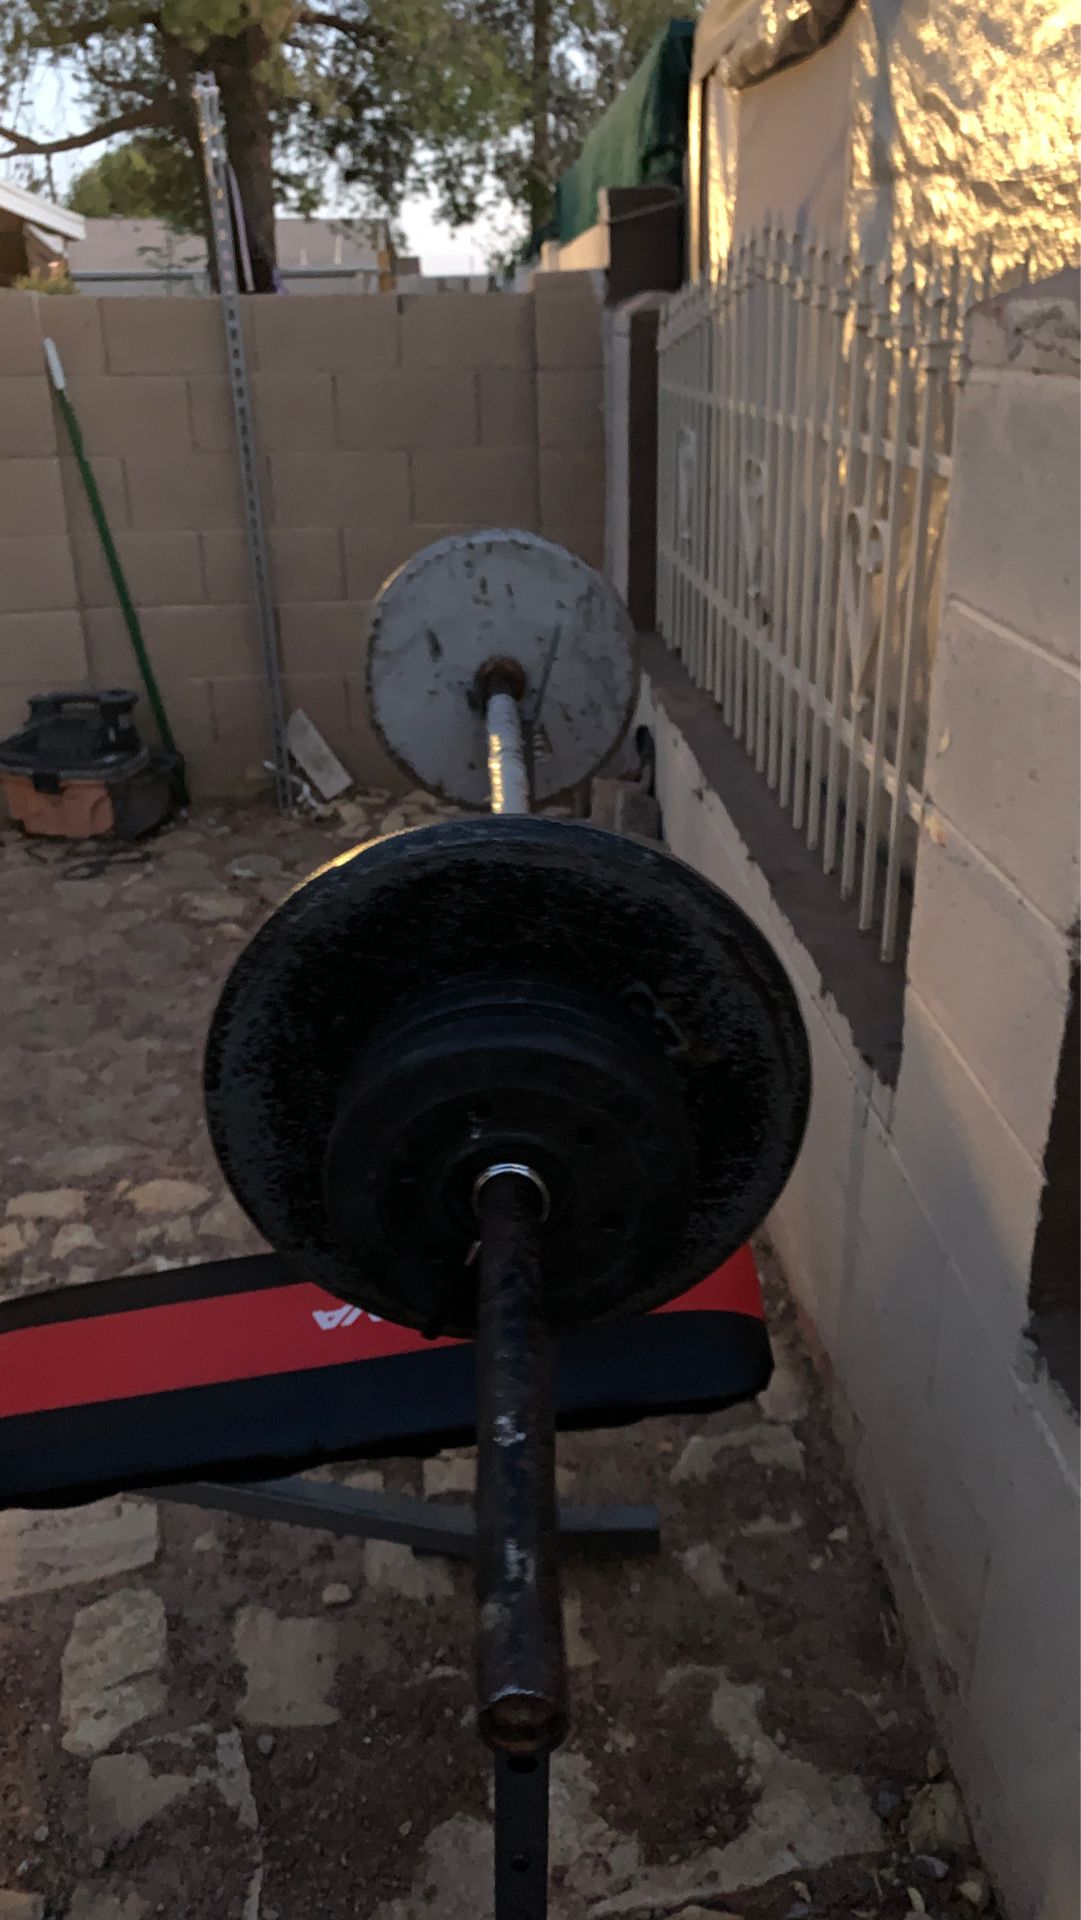 Weights and bar